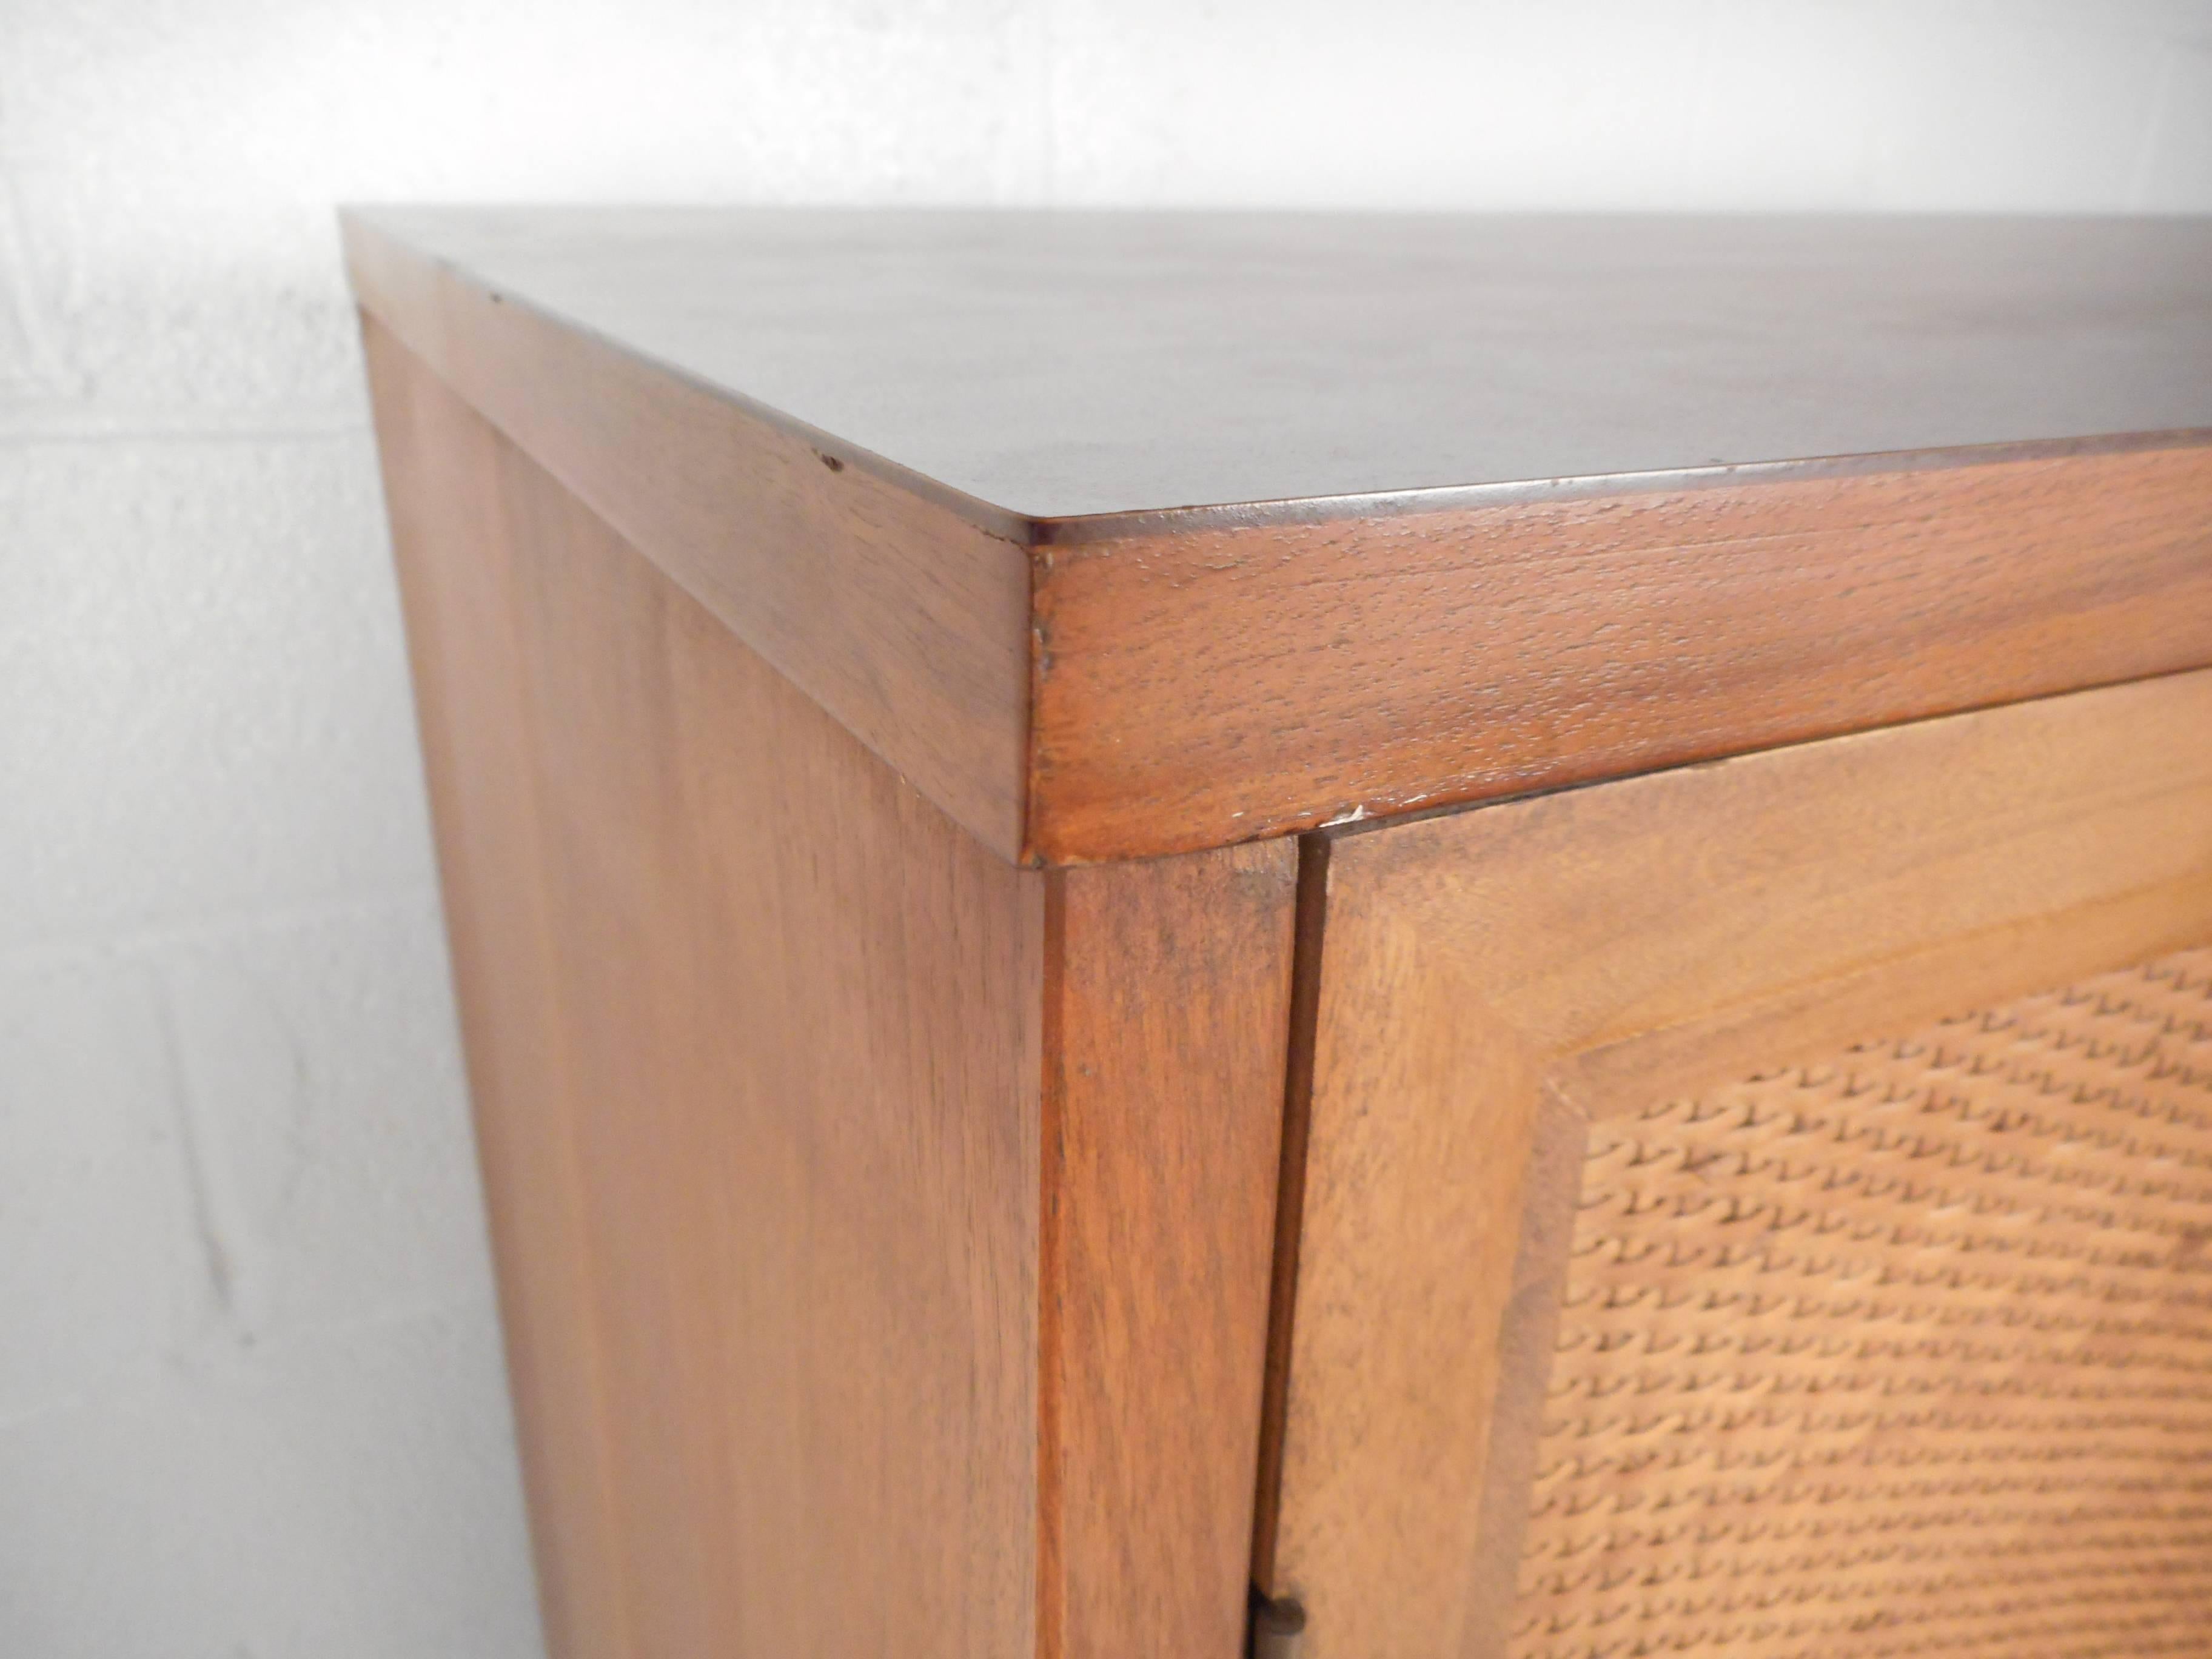 Late 20th Century Mid-Century Modern Cane Front Armoire Dresser